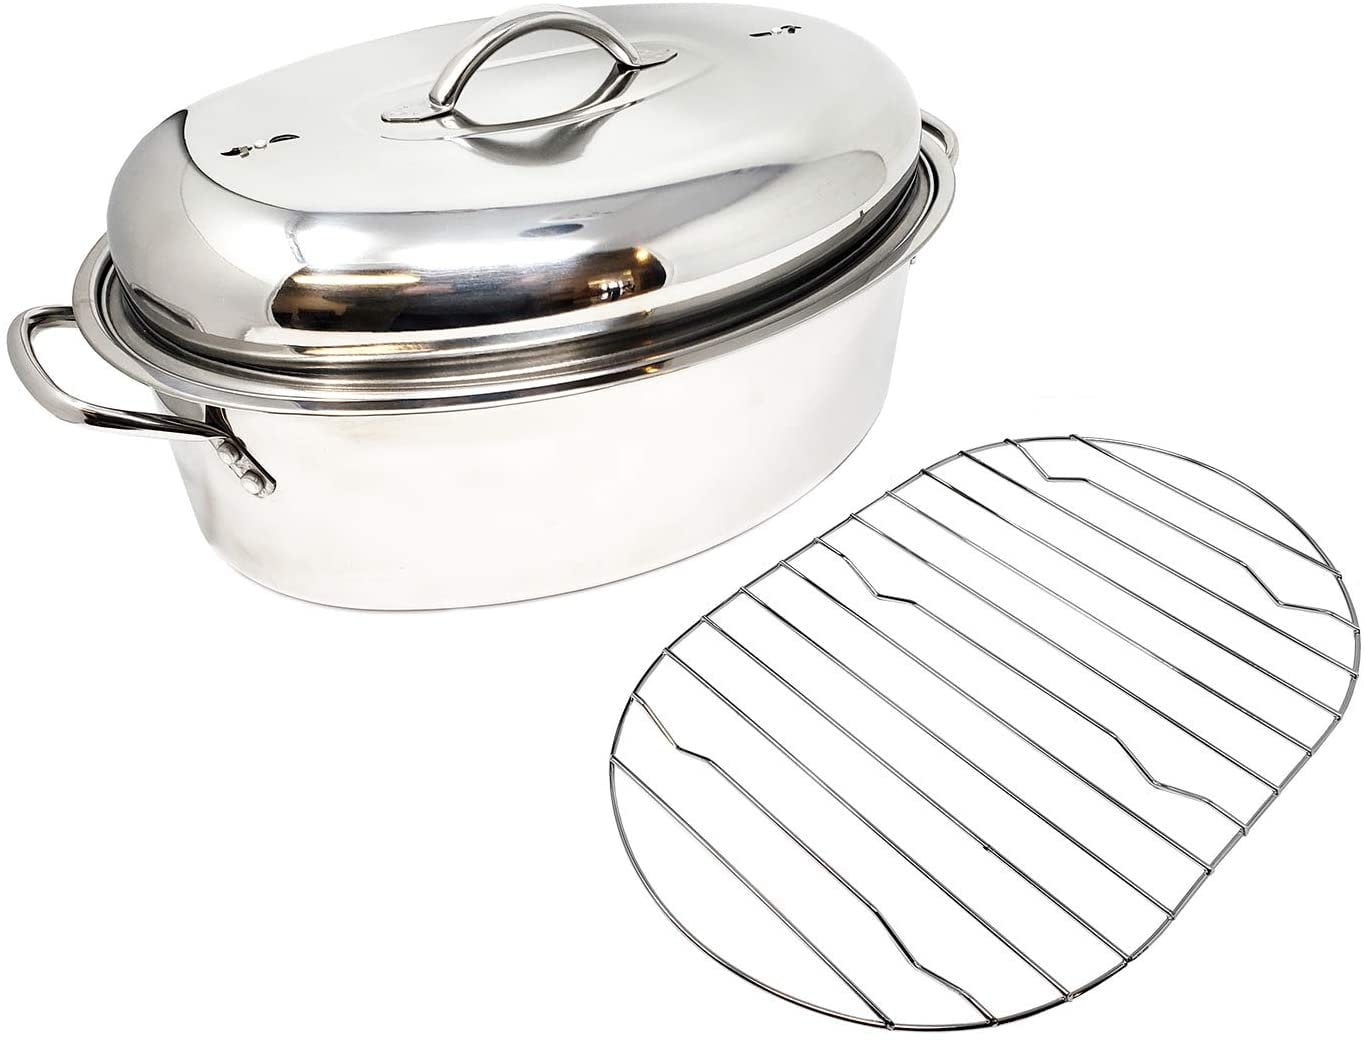 Stainless Steel Oval Lidded Roaster Pan Extra Large & Lightweight With Large Stainless Steel Dish Pan